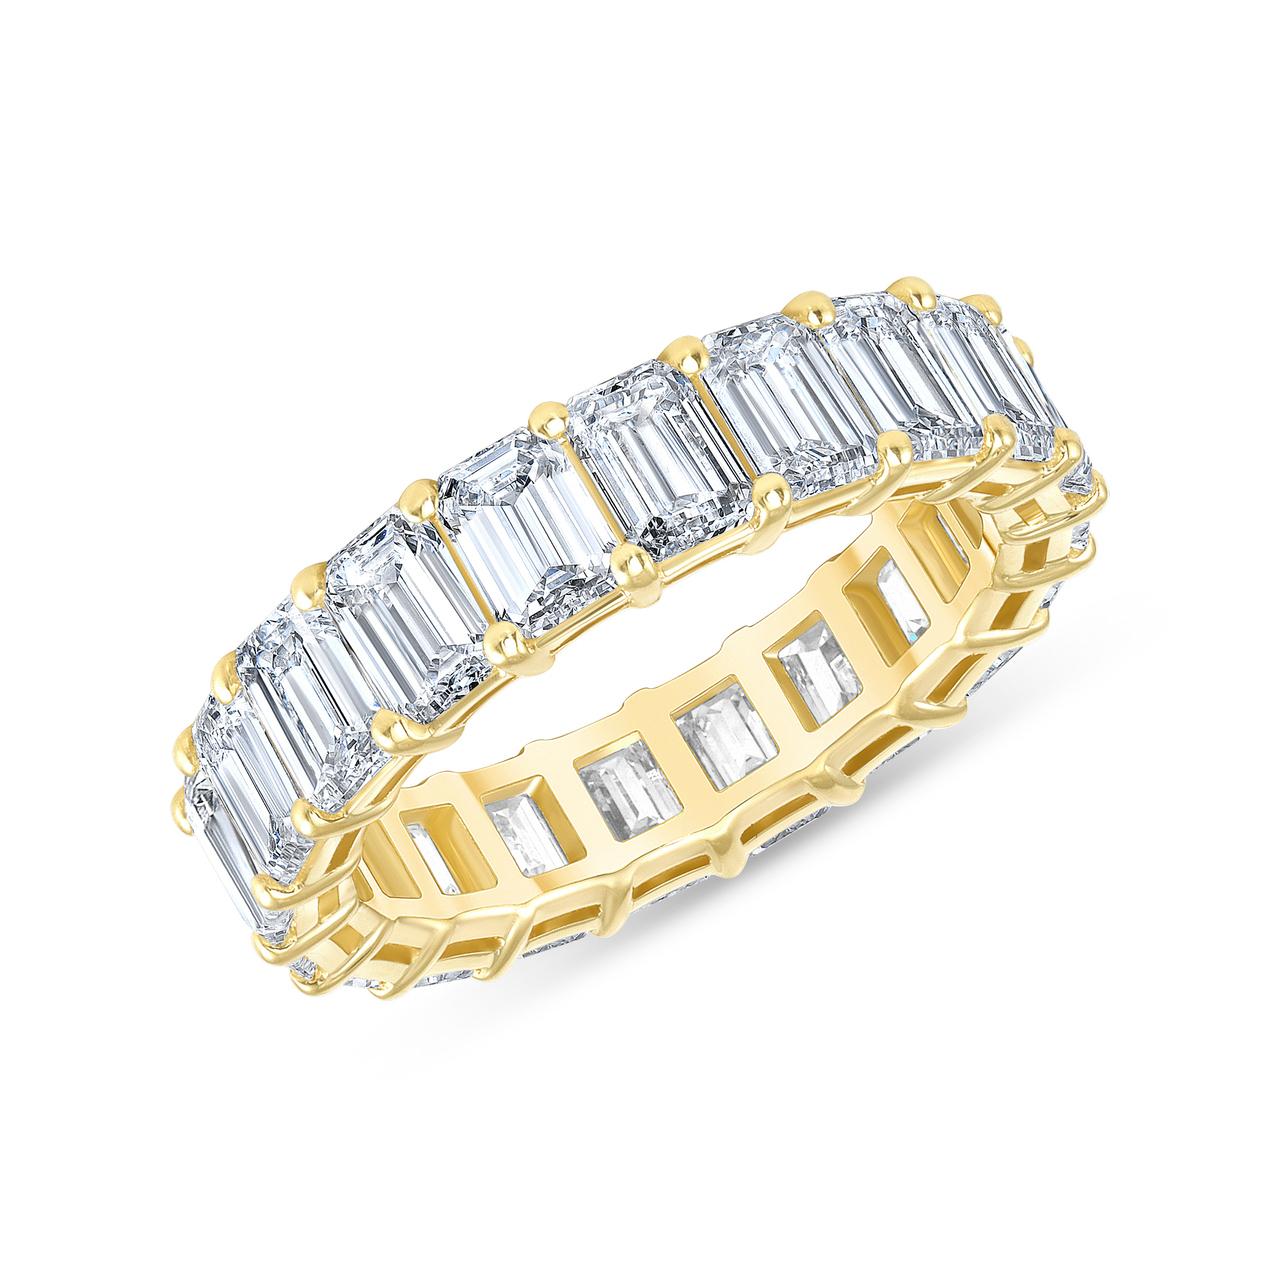 HRD Certified 5.65 Carat Emerald Cut White Diamond Eternity Ring / Band Rings For Sale 4